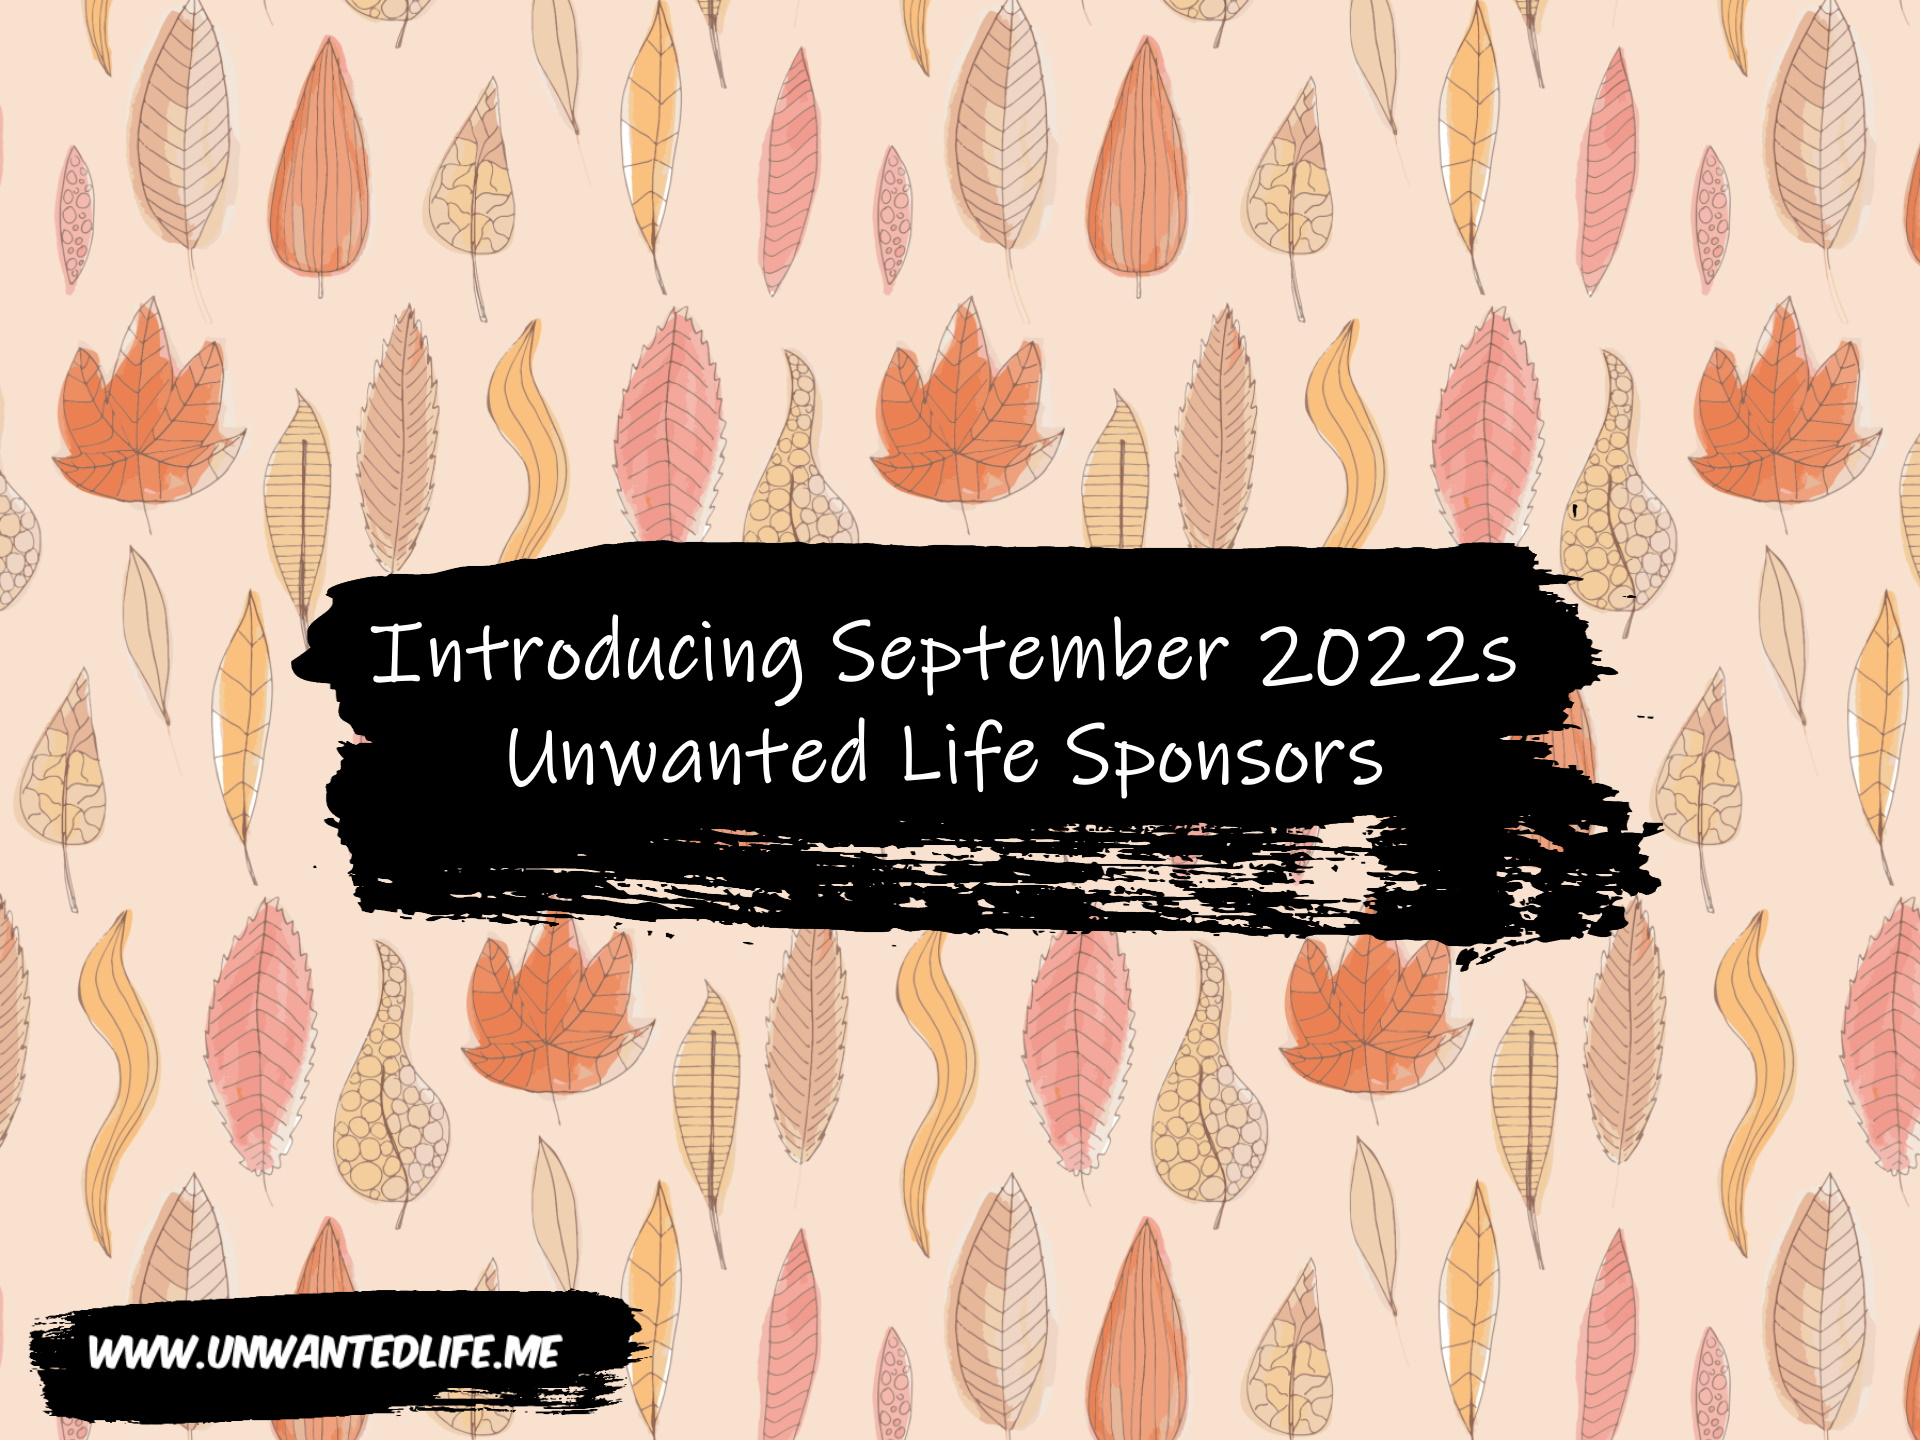 A background of brown leaves with the title of the article across the middle of the image - Introducing September 2022s Unwanted Life Sponsors